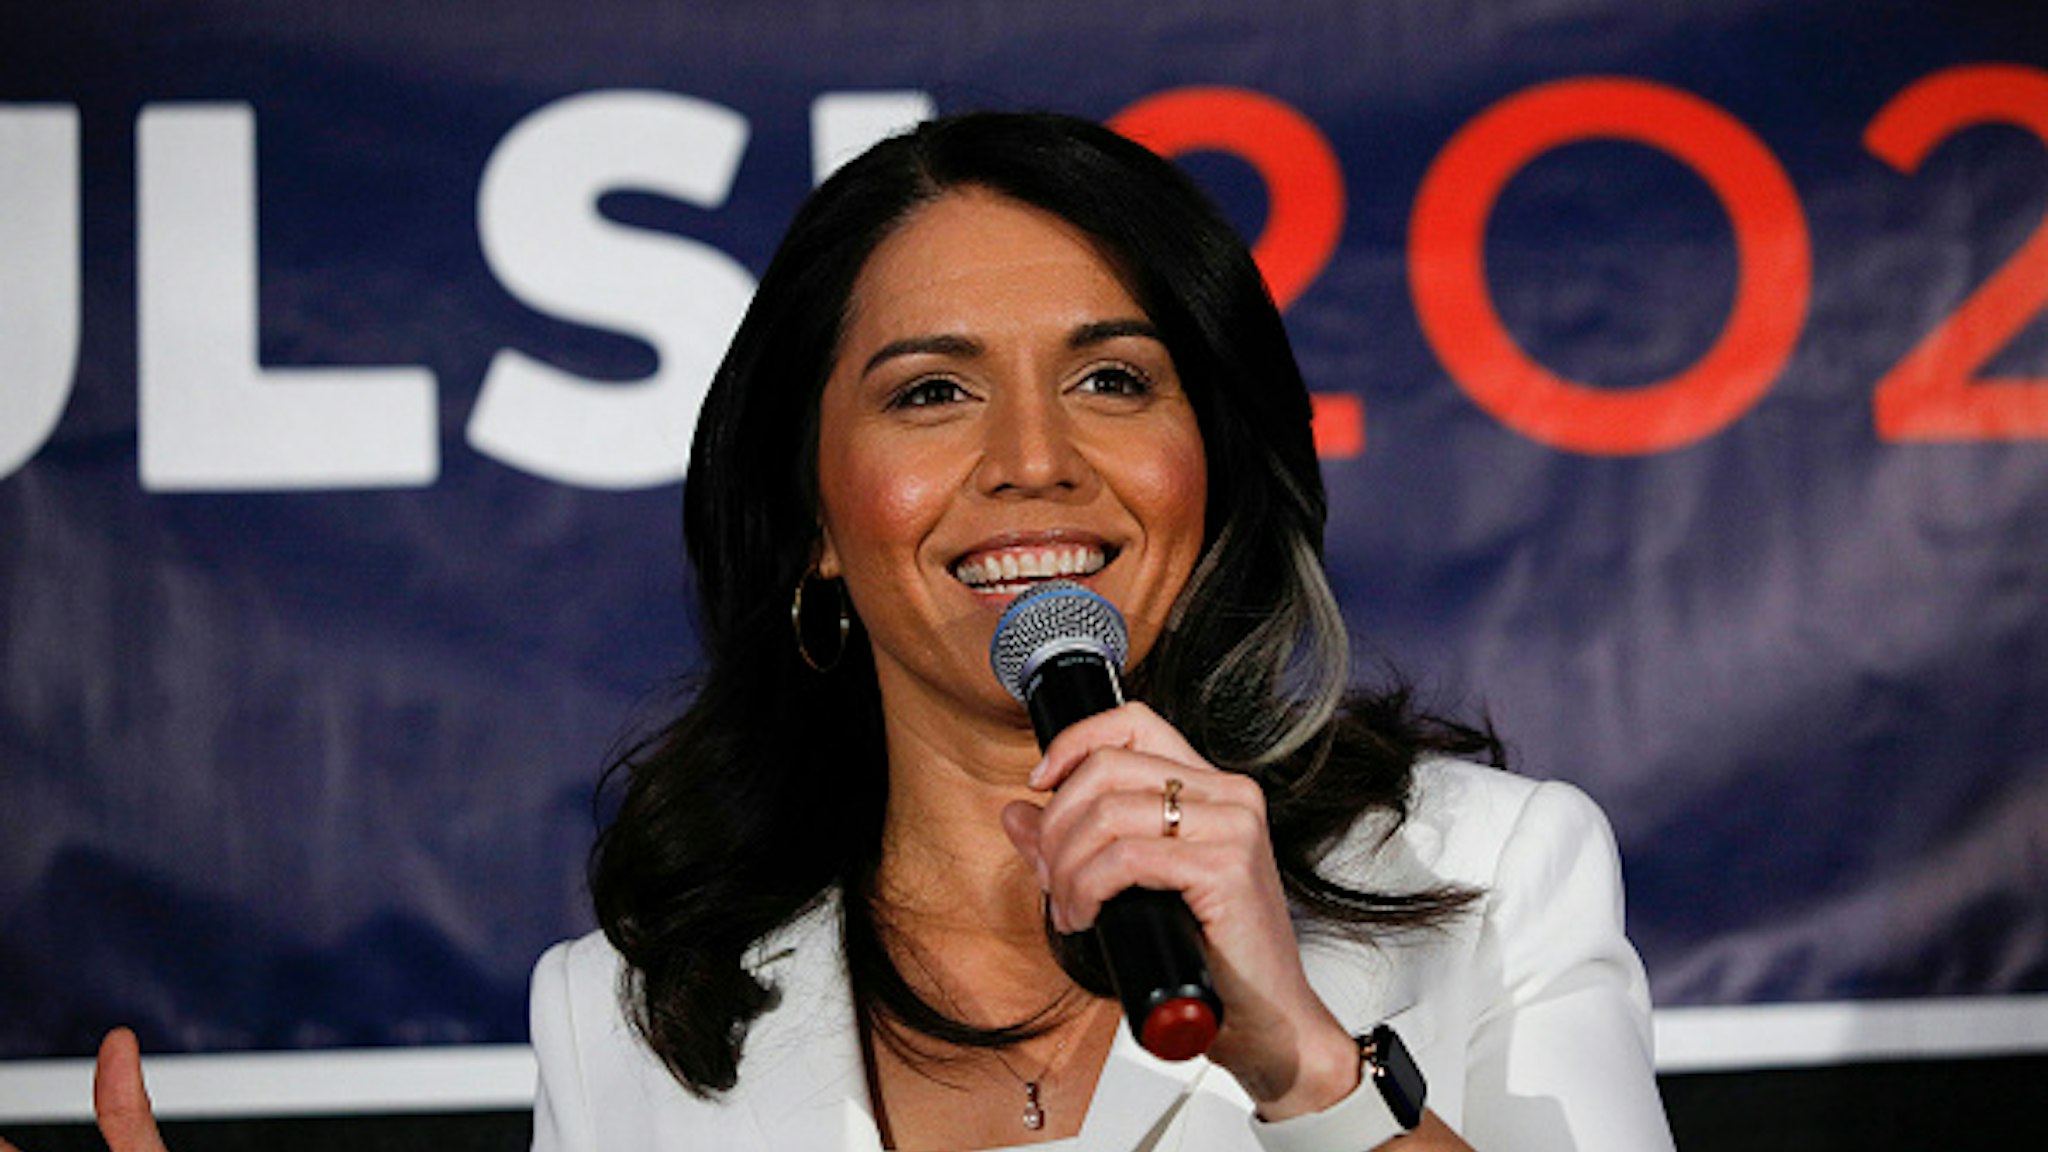 DETROIT, MI - MARCH 03: Democratic presidential candidate U.S. Representative Tulsi Gabbard (D-HI) holds a Town Hall meeting on Super Tuesday Primary night on March 3, 2020 in Detroit, Michigan. Gabbard, the first Samoan American and first Hindu elected to Congress, is one of two women left in the Democratic Primary, the other being Senator Elizabeth Warren.